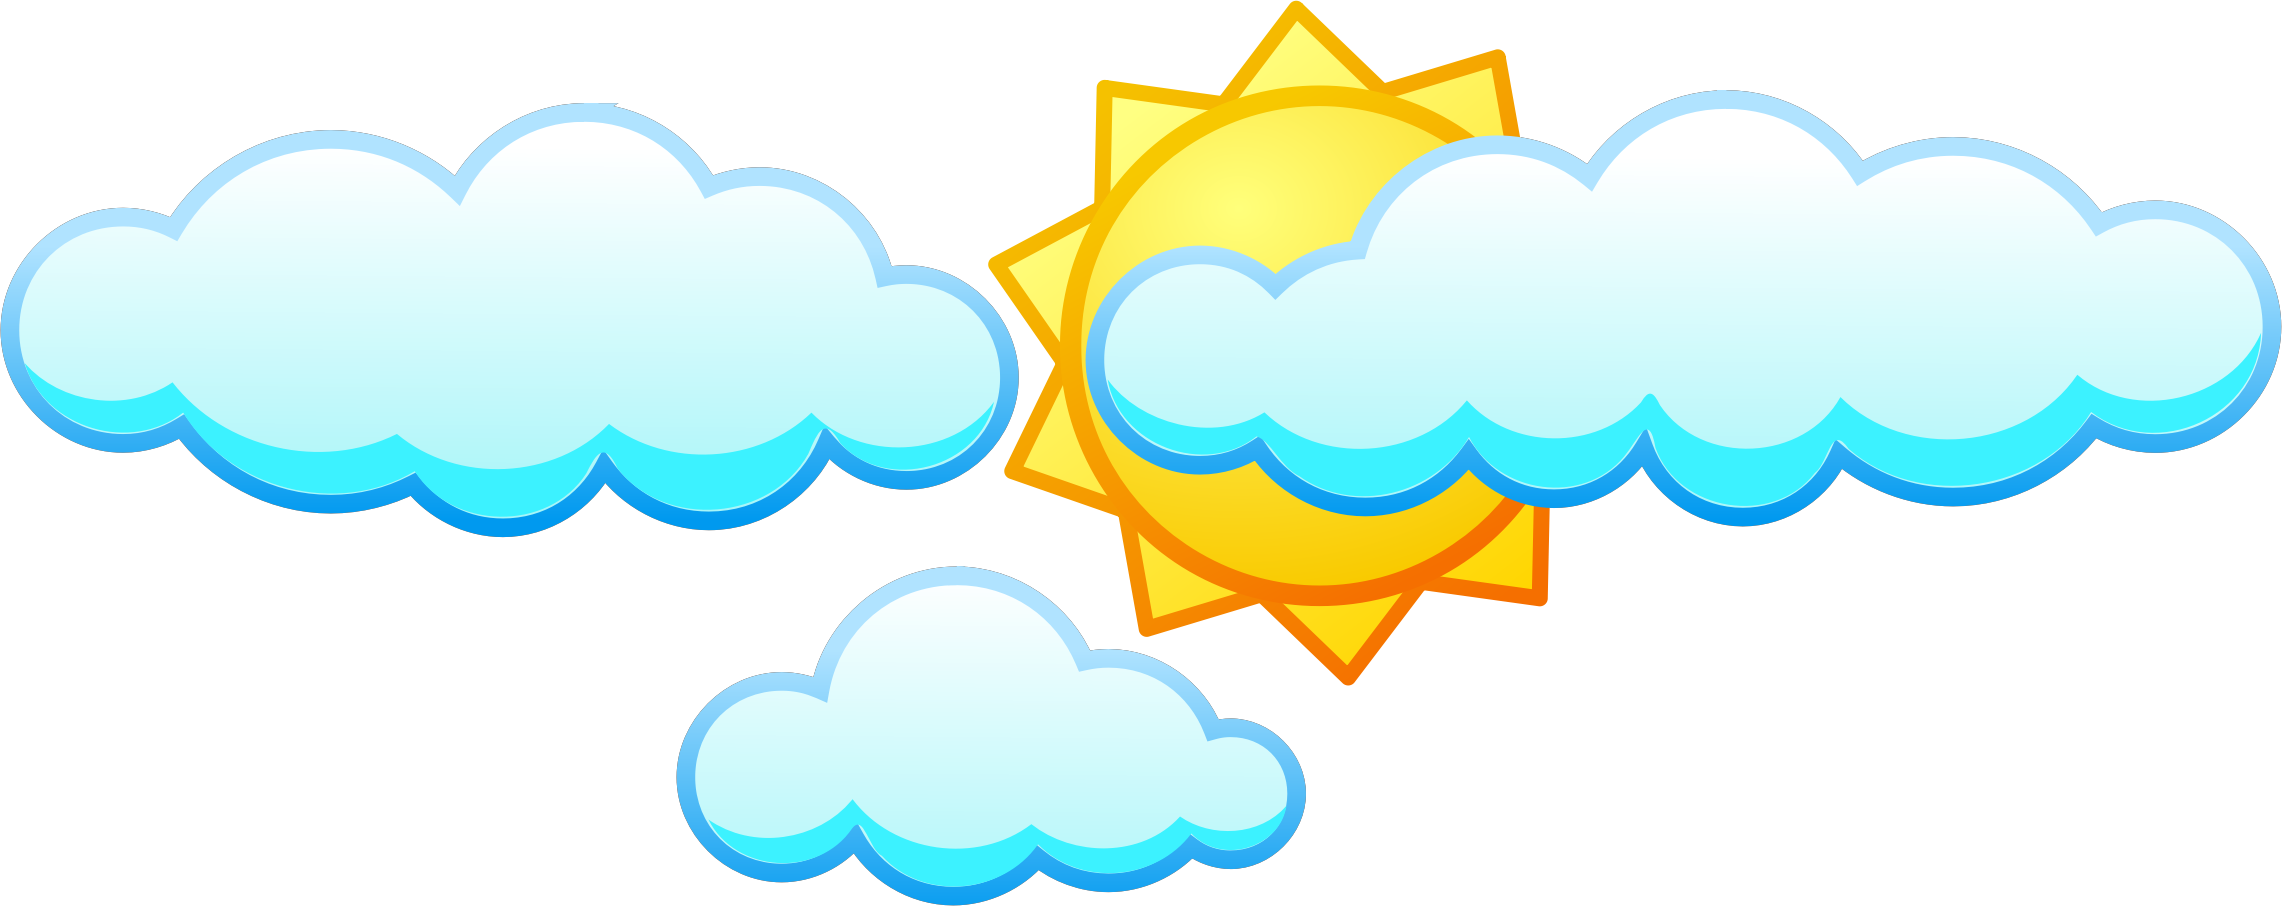 Big Image (Png) - Sun And Clouds, Transparent background PNG HD thumbnail